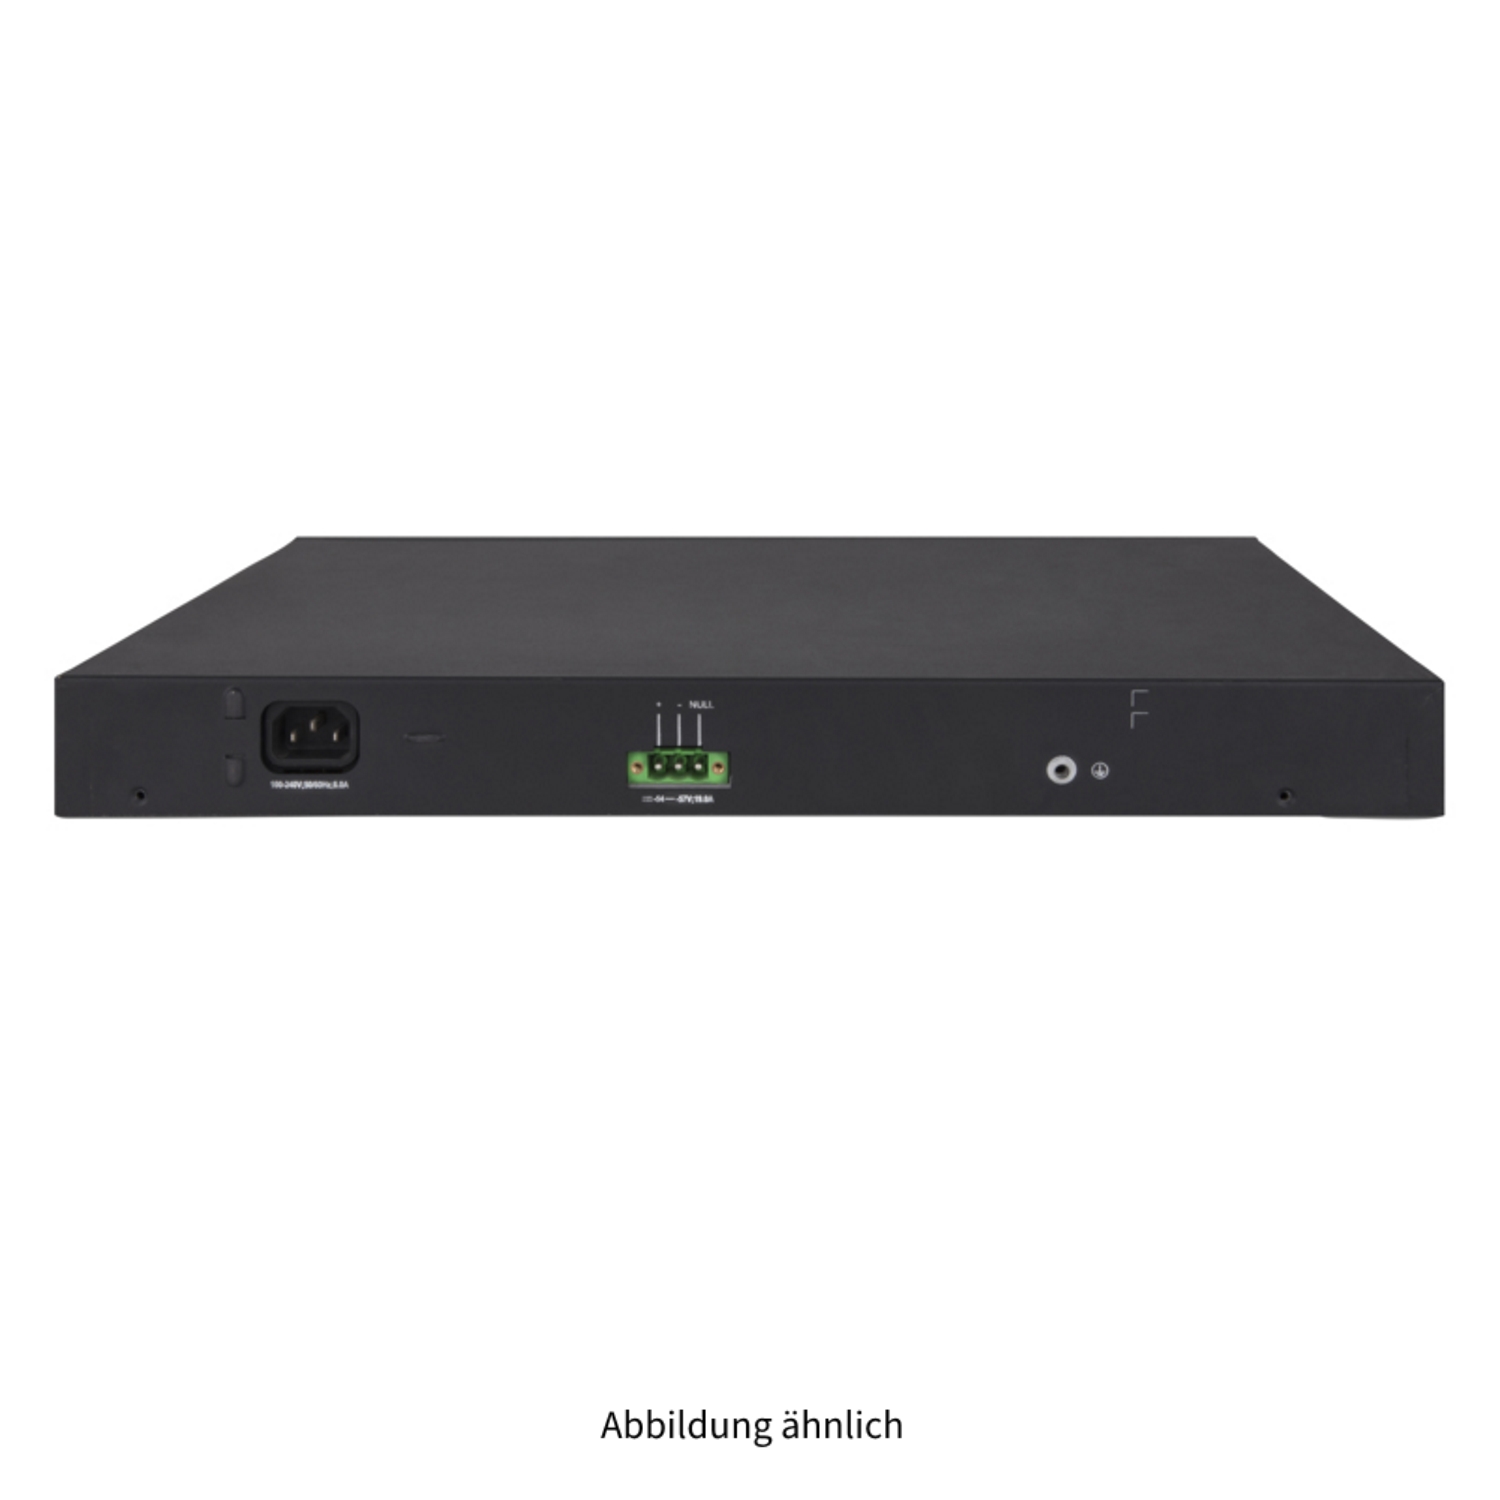 HPE OfficeConnect 1950-24G-SFP+ 24x 1GbE PoE+ 2x 10GbE 2x SFP+ 10GbE Managed Switch JG962A